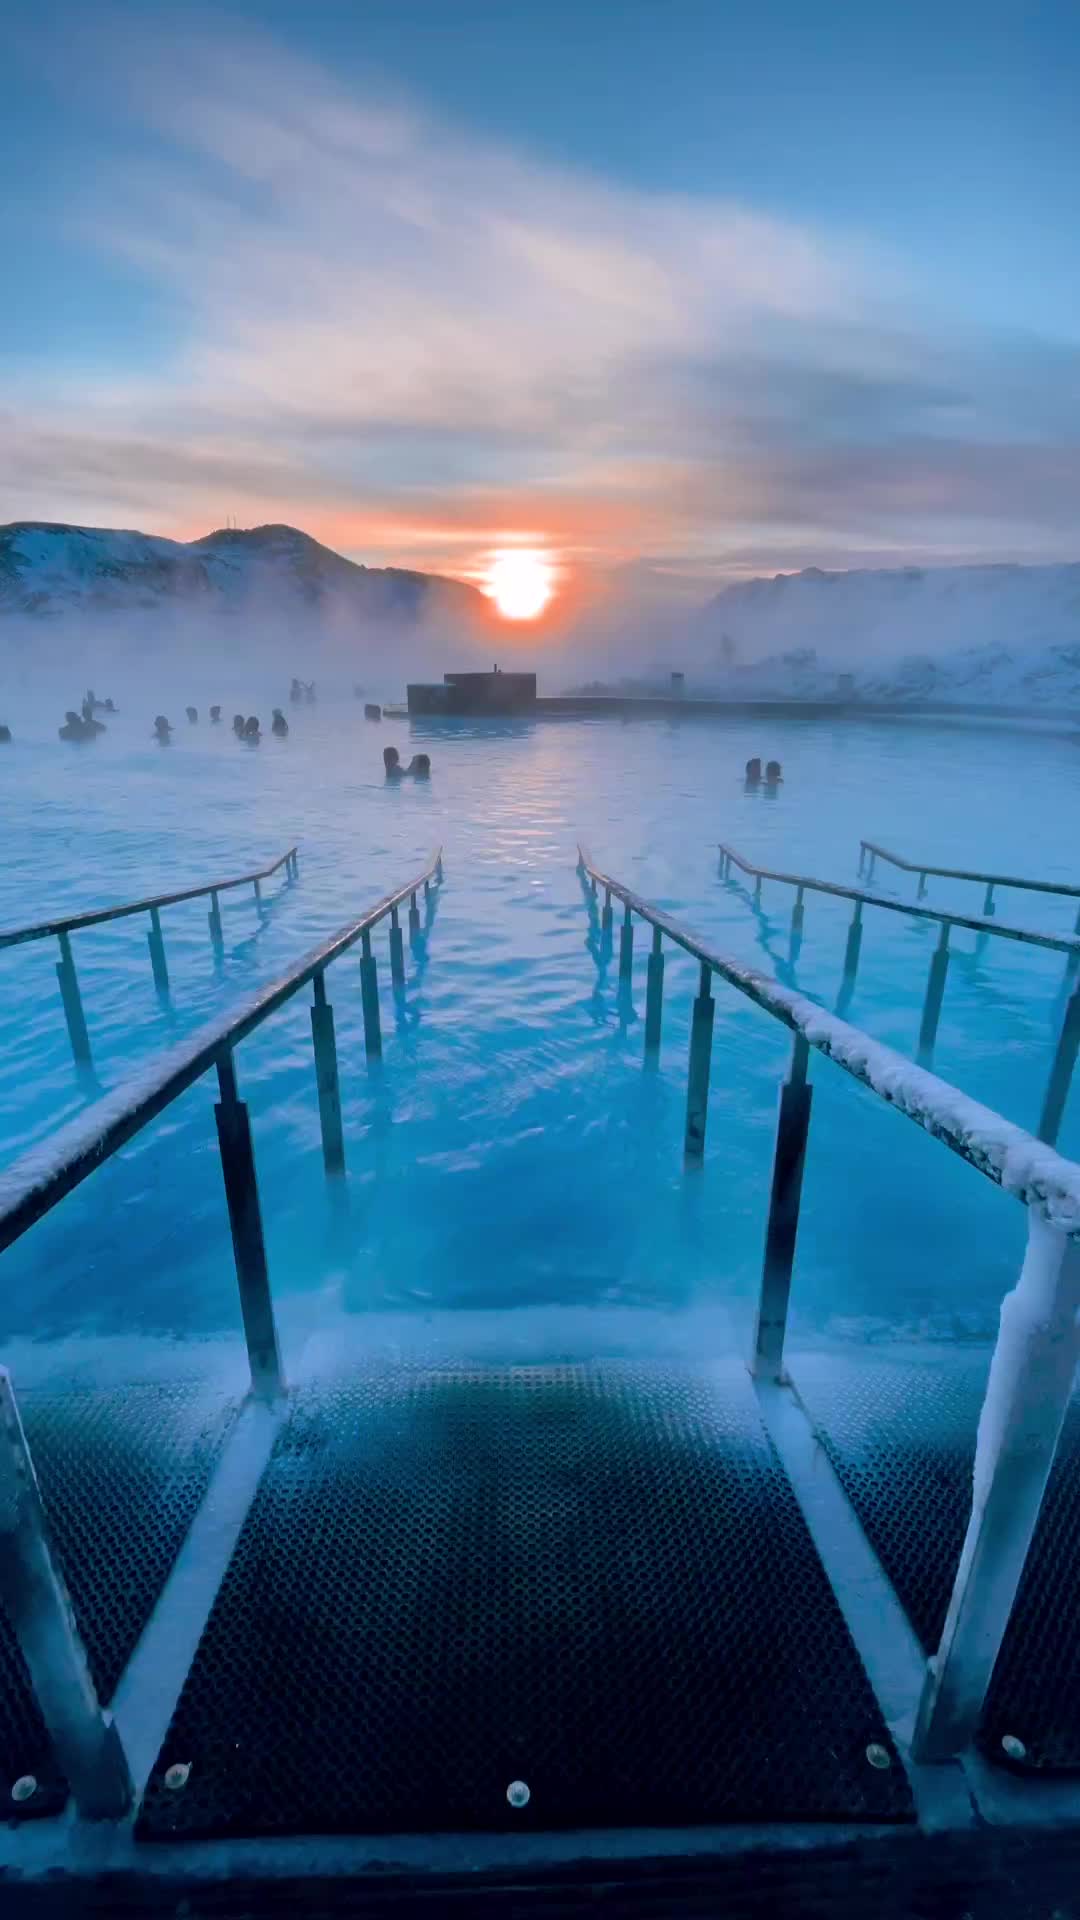 Places like this 💙 save this place for your next visit to Iceland.

@bluelagoonis @guidetoiceland 

#iceland #artofvisuals #wheniniceland #beautifuldestinations #icelandic #sunriseoftheday #earthfocus #guidetoiceland #wonderful_places #paradise #sunrise #ourplanetdaily #exploreourearth #stayandwander #winterwonderland #winter #roamtheplanet #bluelagoonisland #visualambassadors #bluelagooniceland #welivetoexplore #bluelagoon #snow #earthpix #voyaged #ice #earth_shotz #hellofrom